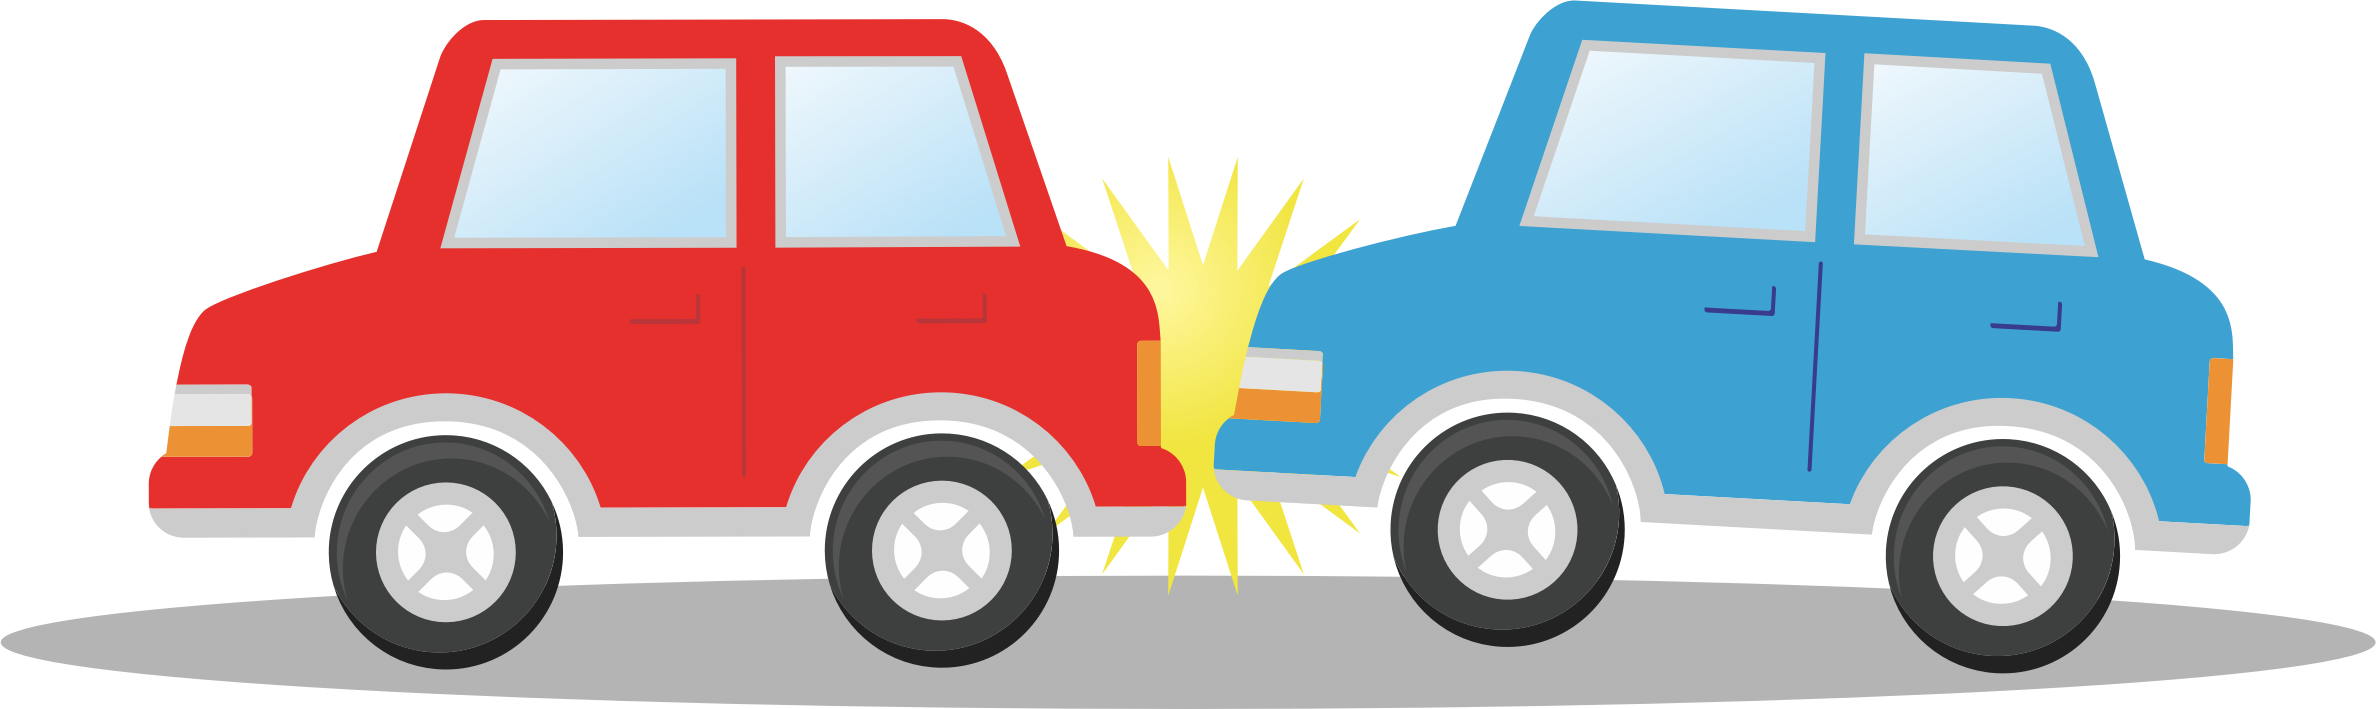 Car Accident PNG Image Background